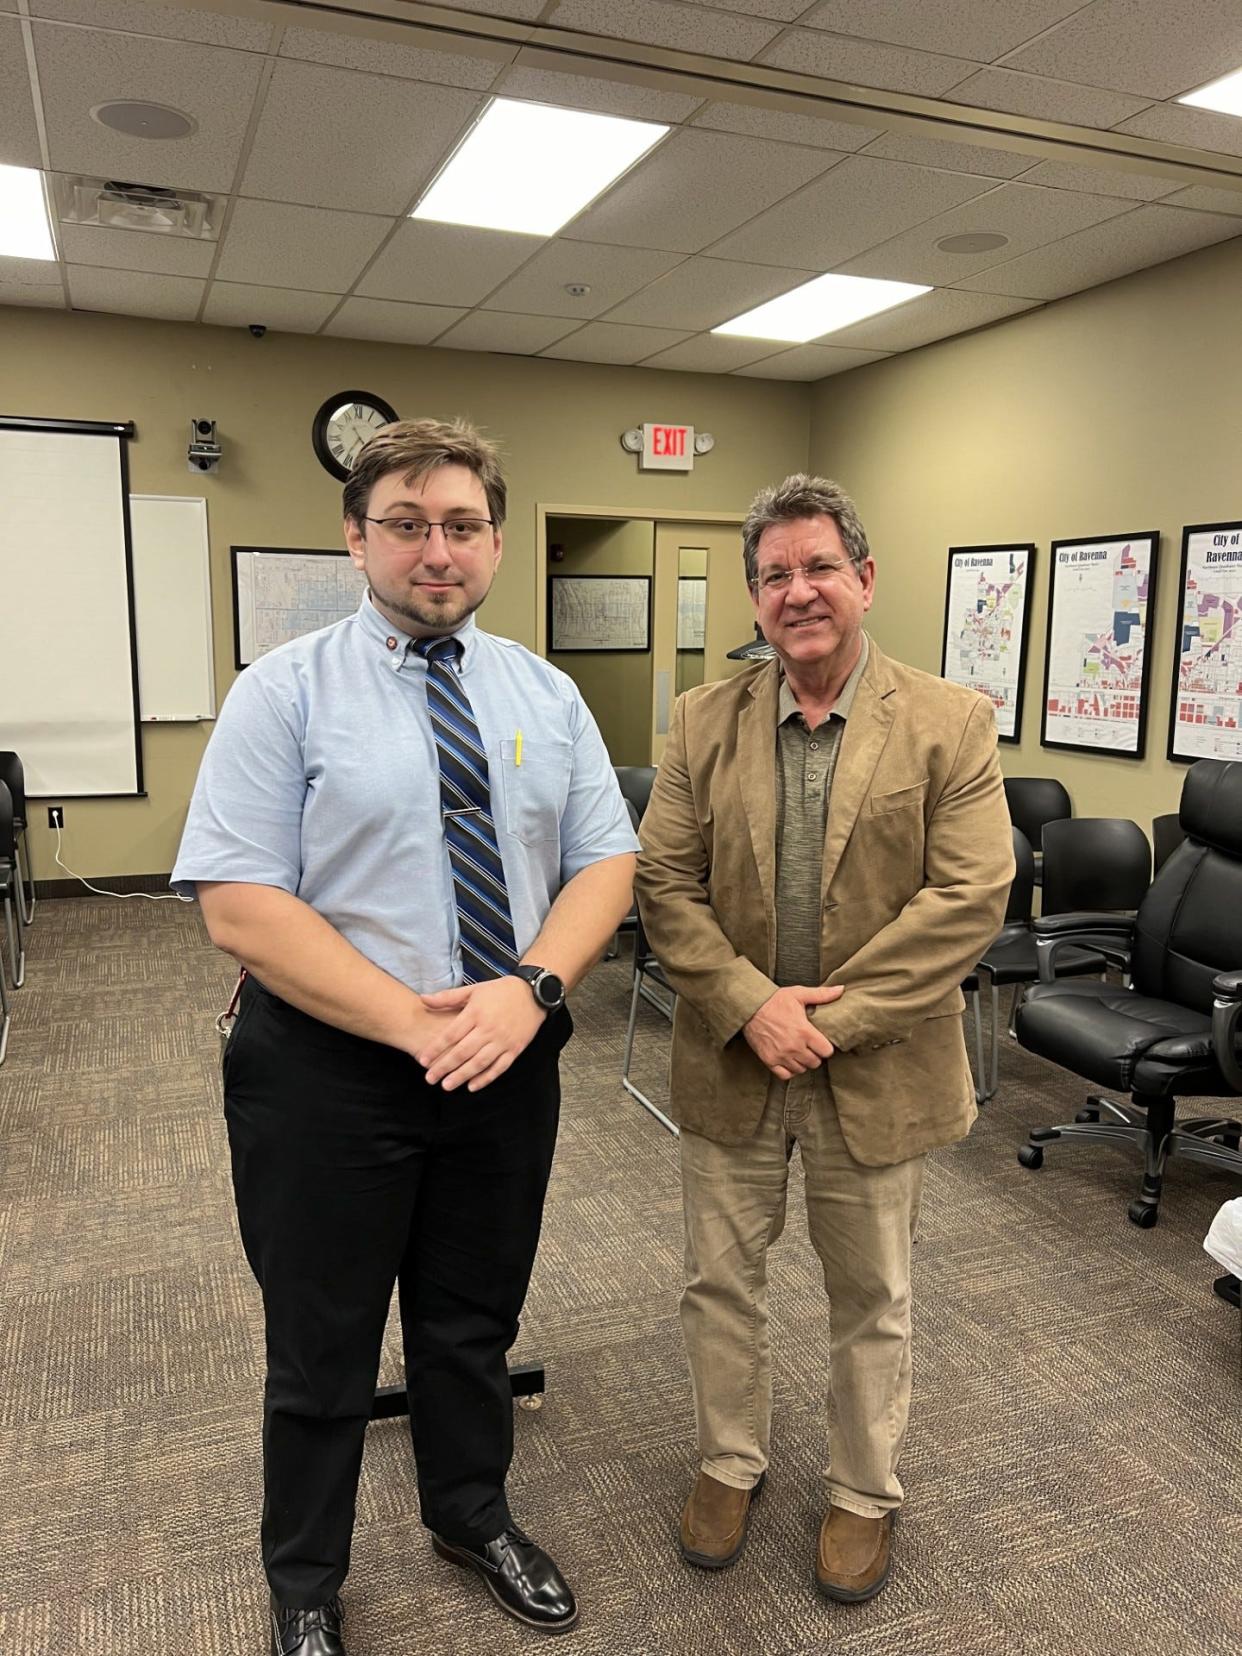 Tyler Marovich, left, was appointed to represent Ward 2 on Ravenna City Council. He replaces Rob Kairis, right, who was named president of council. Kairis succeeded Andrew Kluge, who recently resigned.